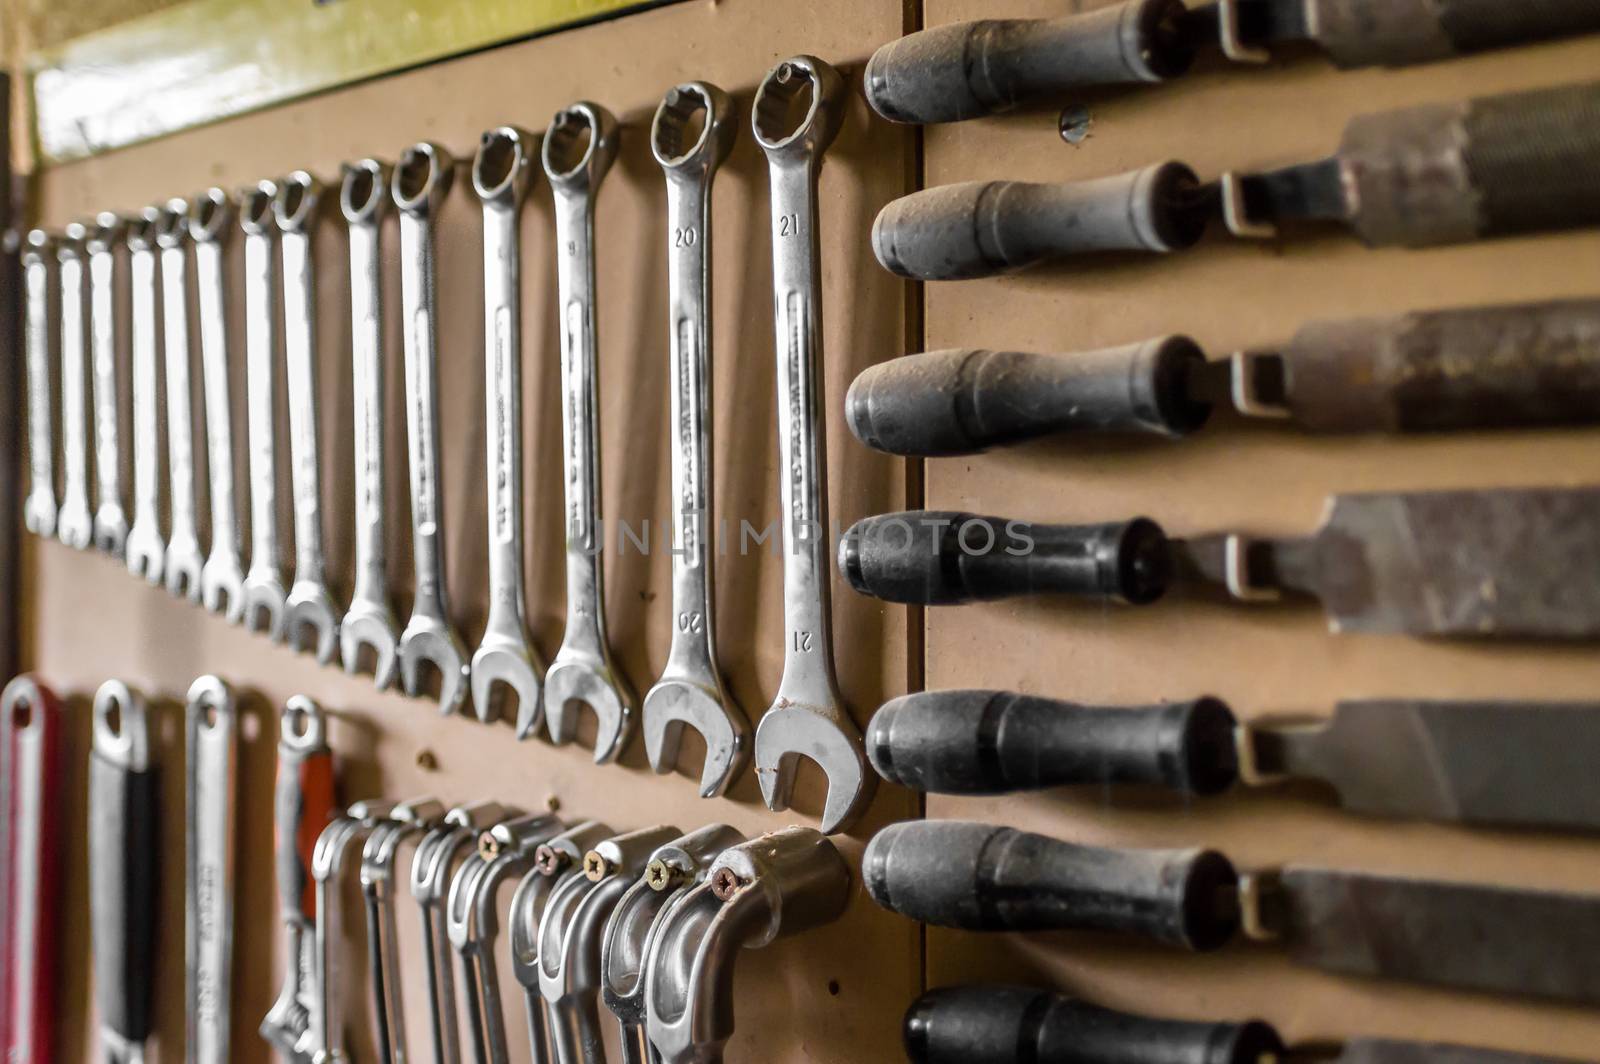 Set of wrenches. Wrenches in several different sizes hanging in the garage